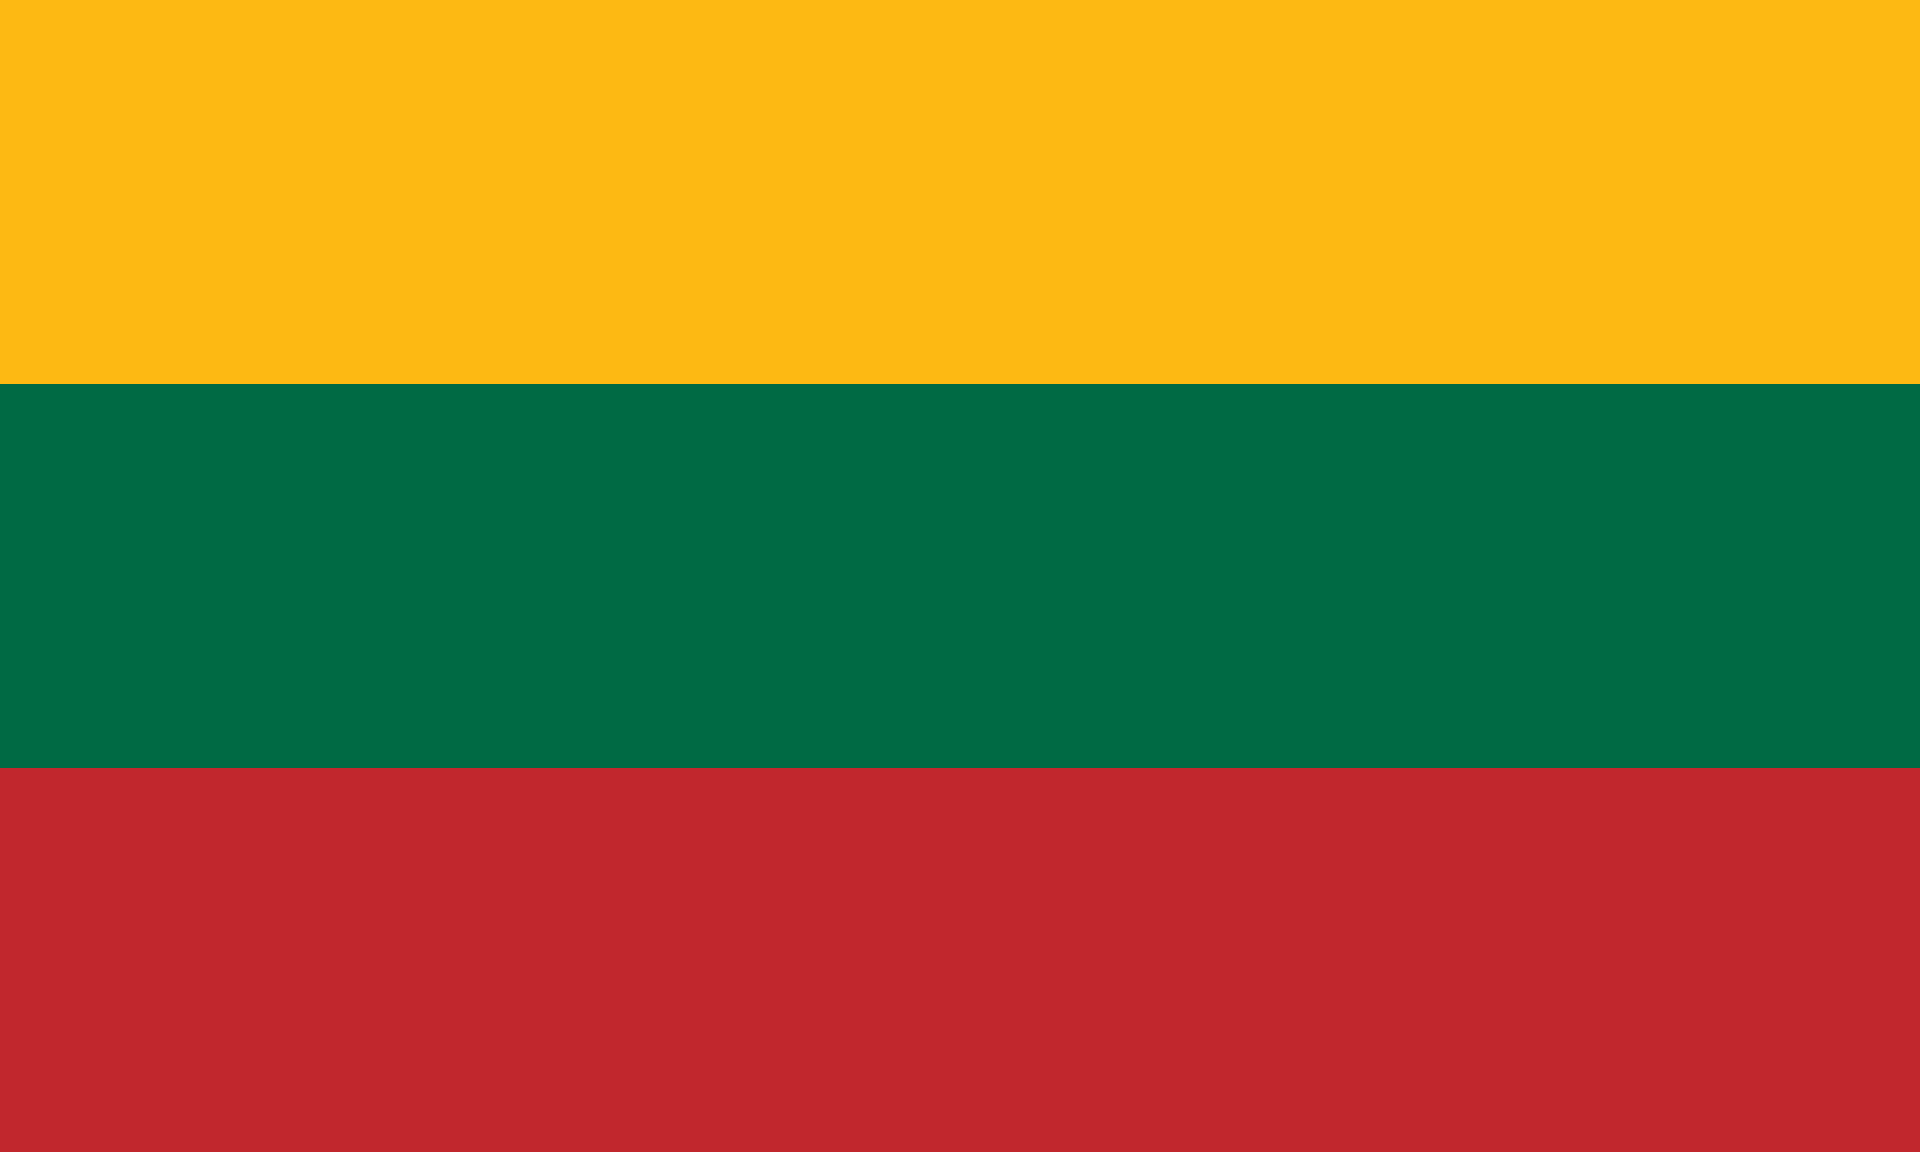 langfr-1920px-Flag_of_Lithuania.svg